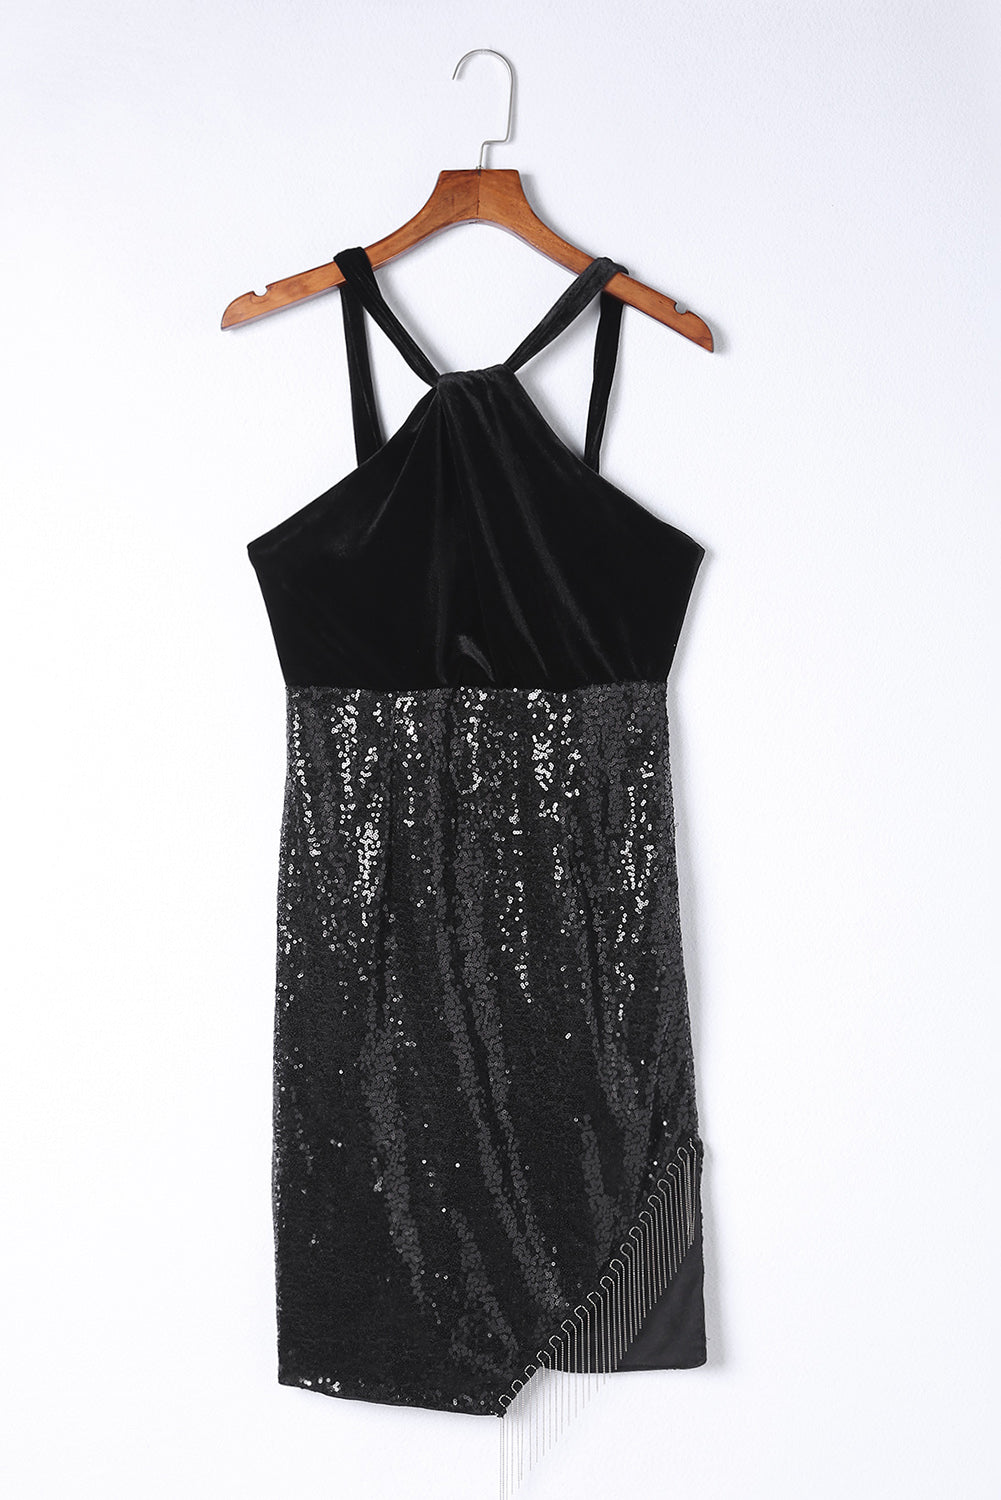 Sequin Fringe Detail Sleeveless Dress - Cheeky Chic Boutique